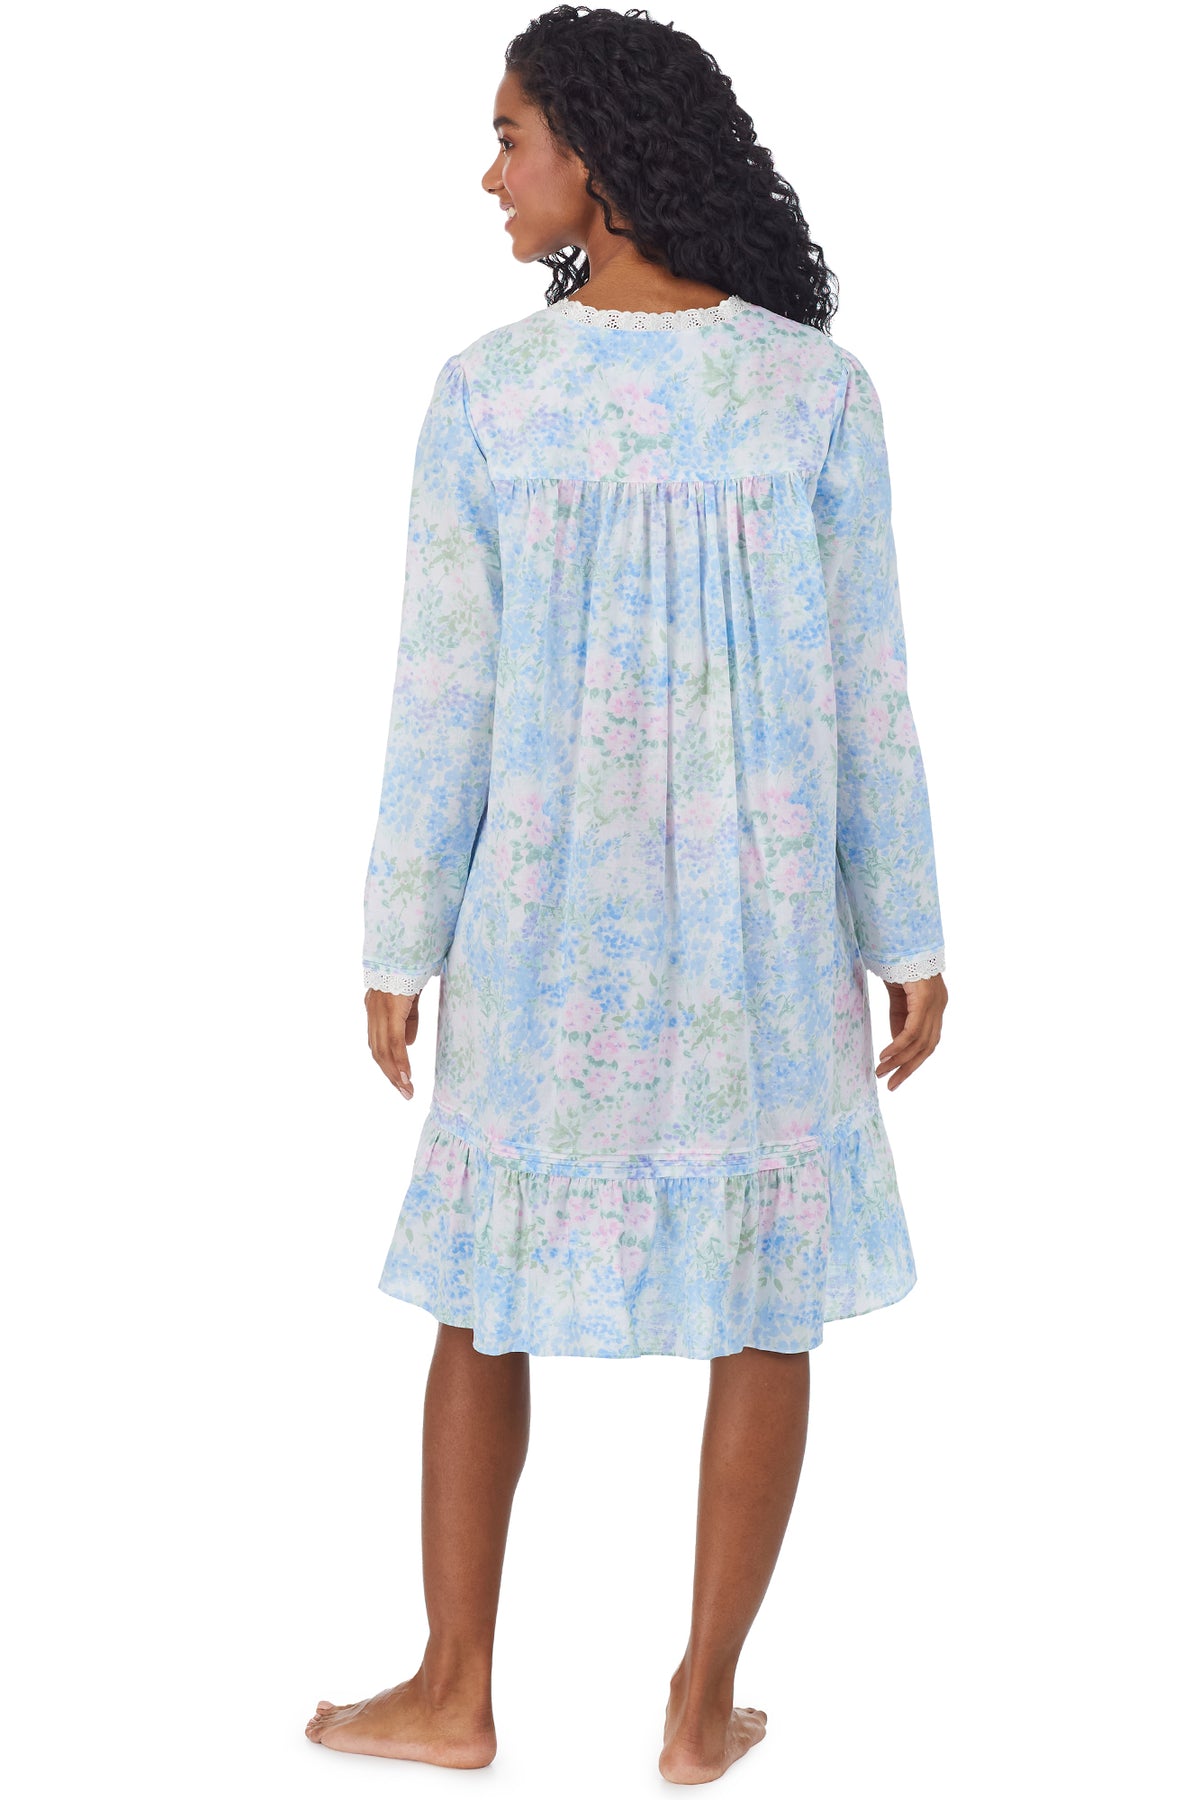 A lady wearing a white long sleeve short robe with blue floral print.